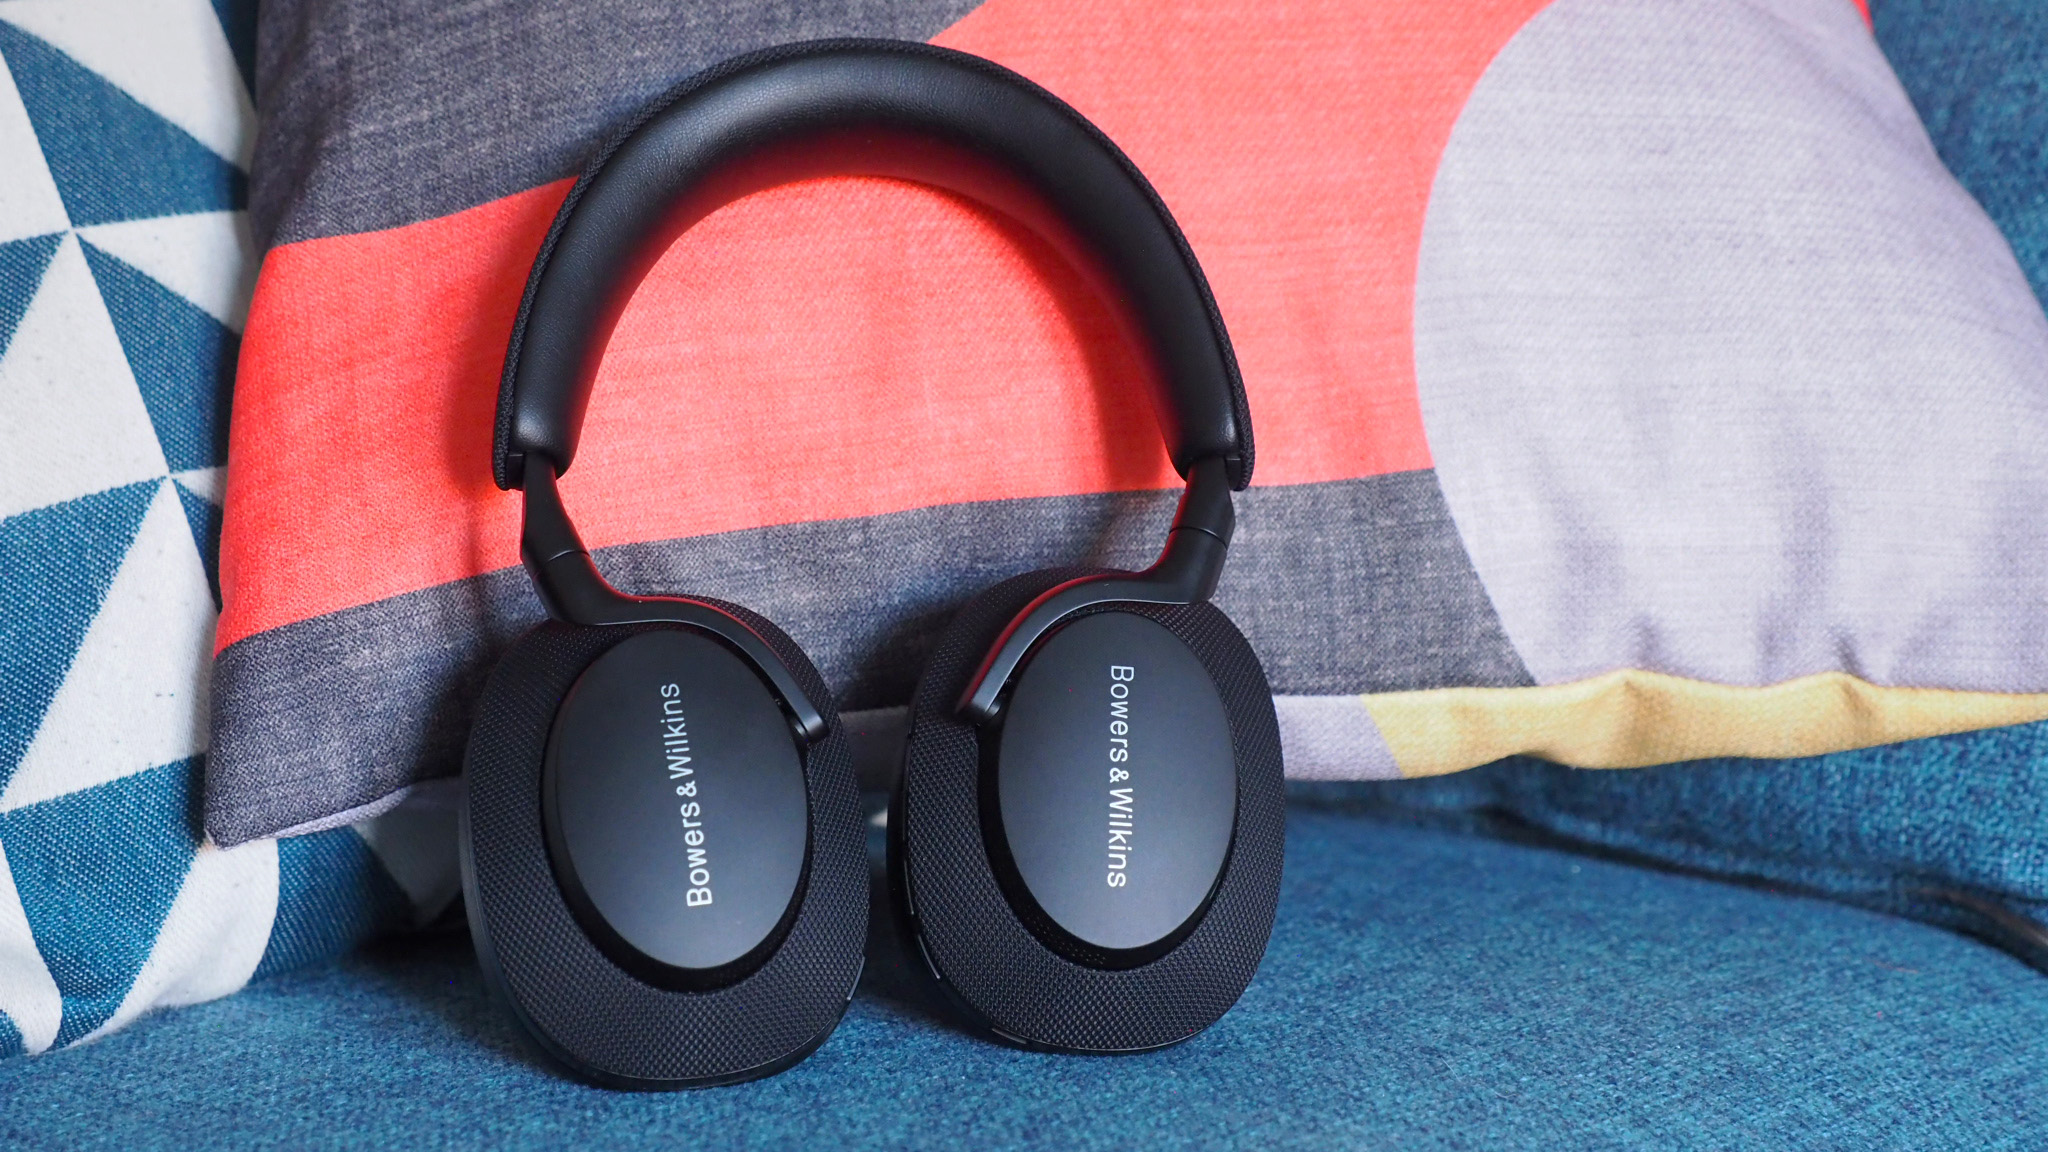 Bowers & Wilkins PX7 S2 review: great sound with style - The Verge